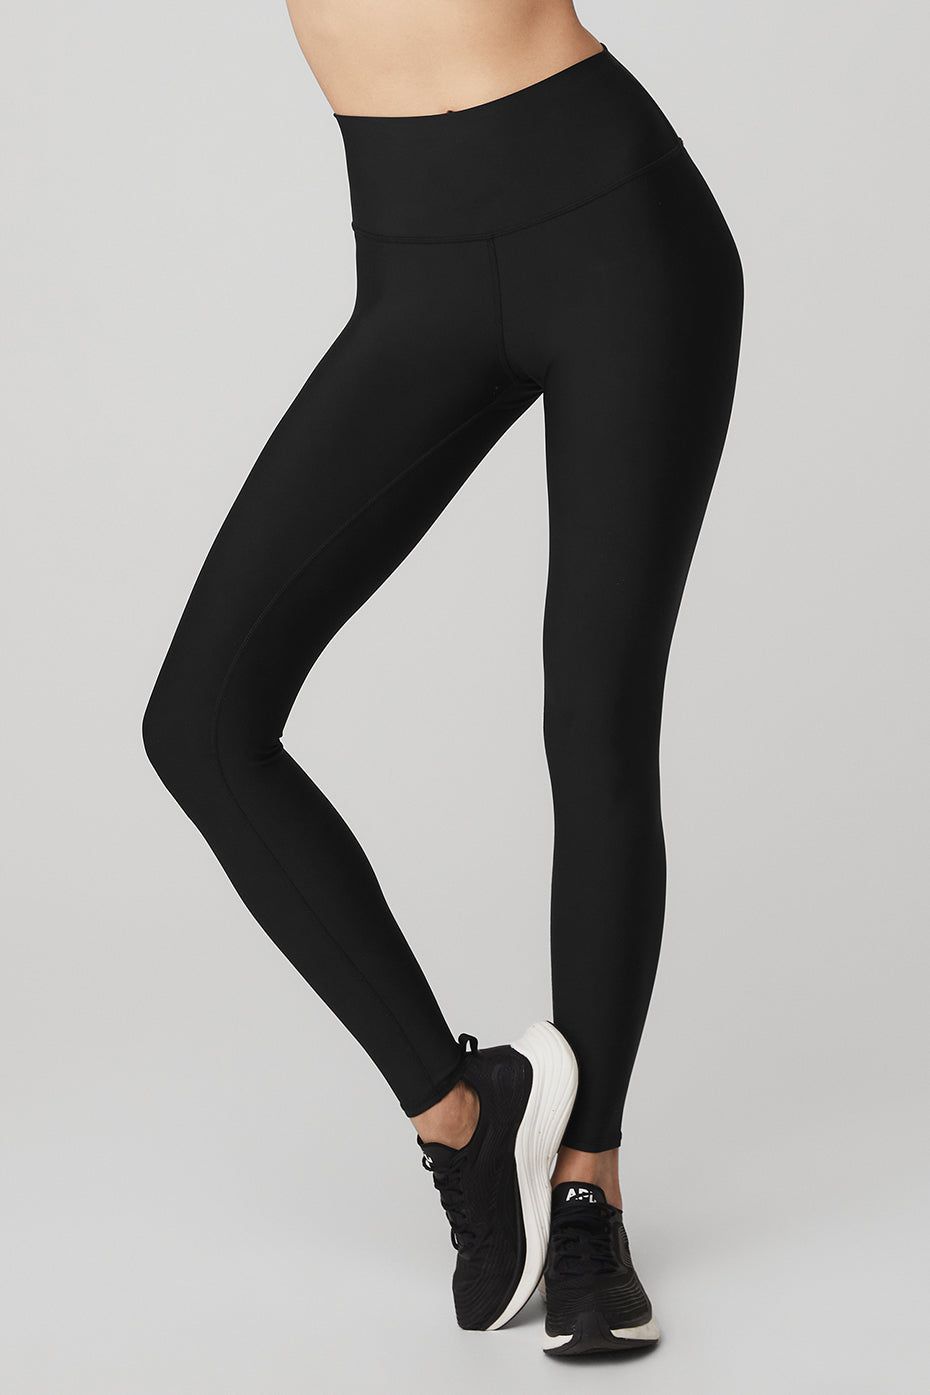 High-Waist Airlift Legging in Hot Cocoa by Alo Yoga